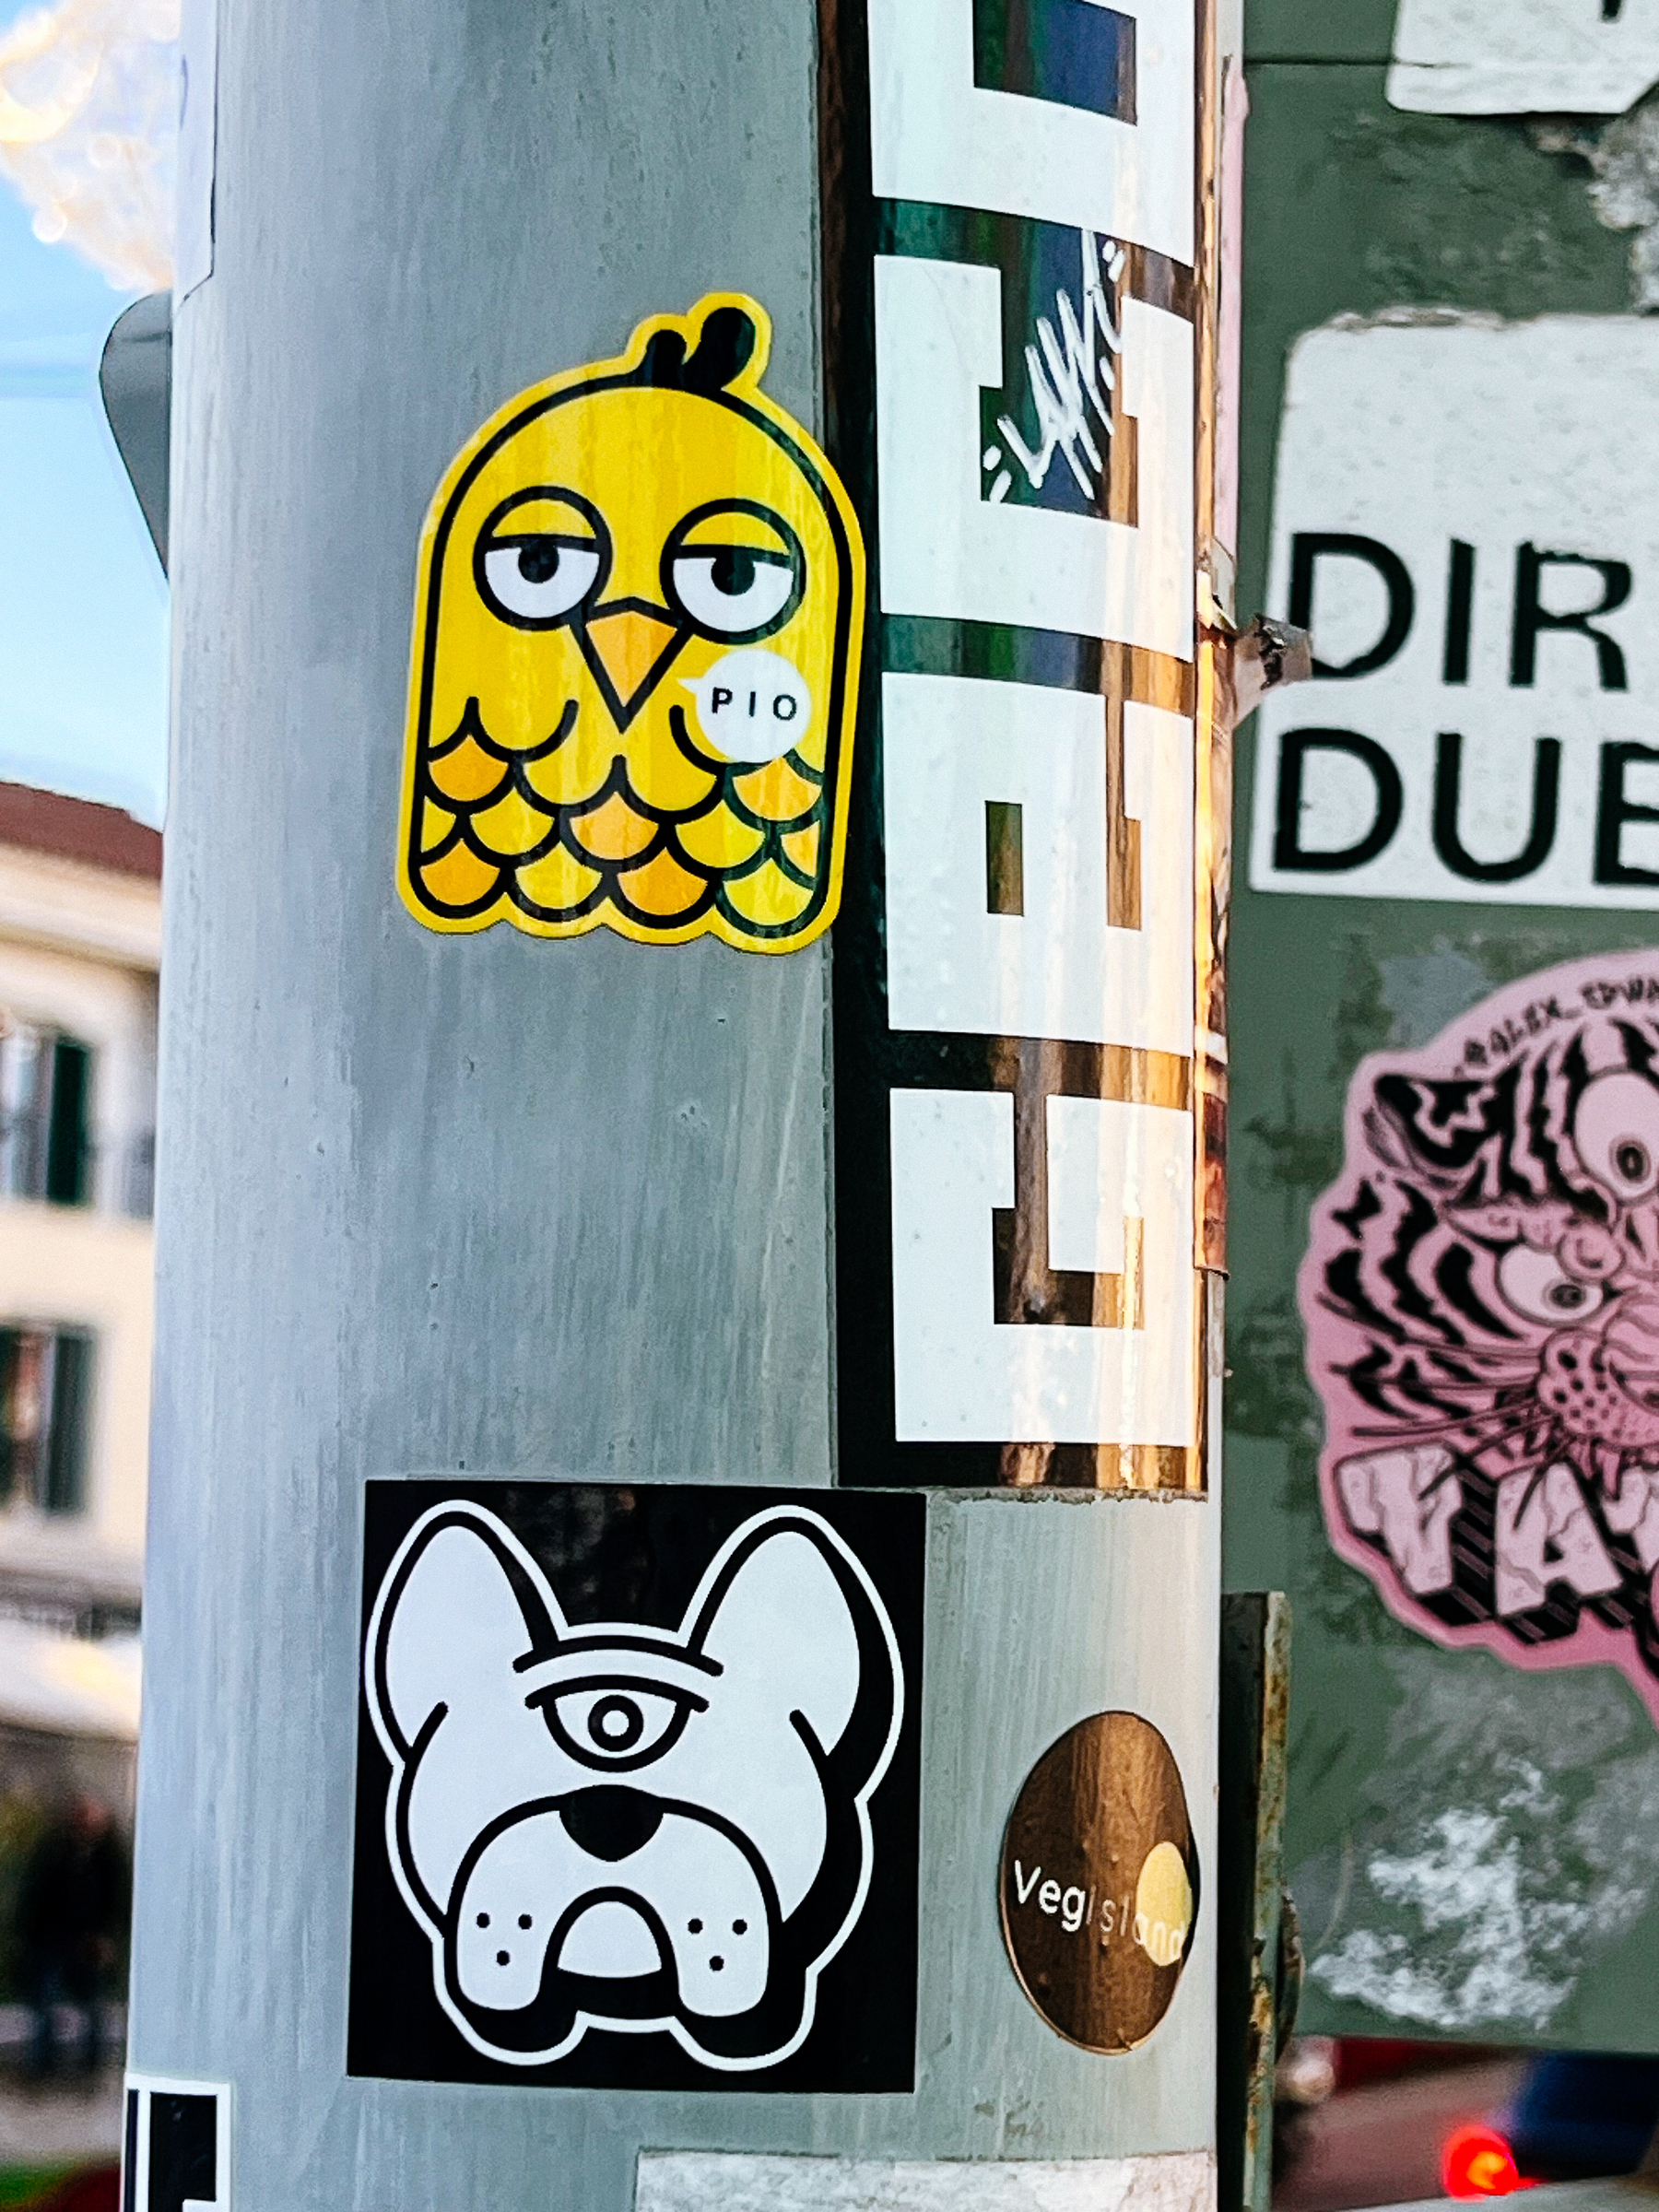 A yellow bird’s face, cute. And a one eyed dog. Both stickers. 